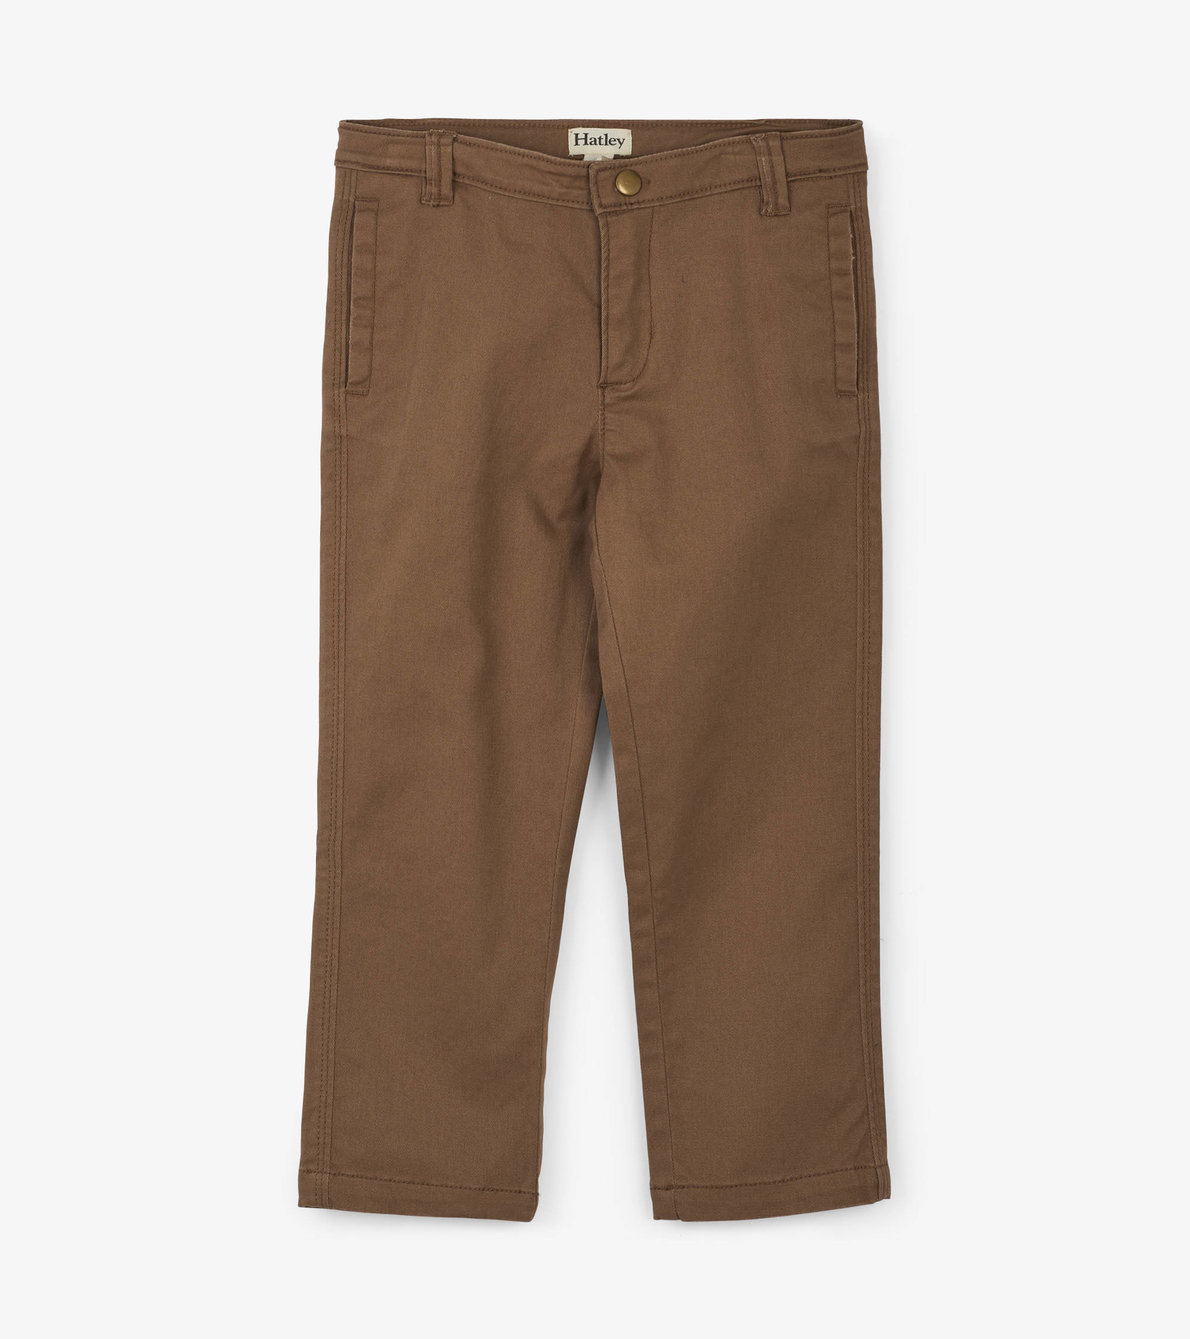 View larger image of Khaki Stretch Twill Pants